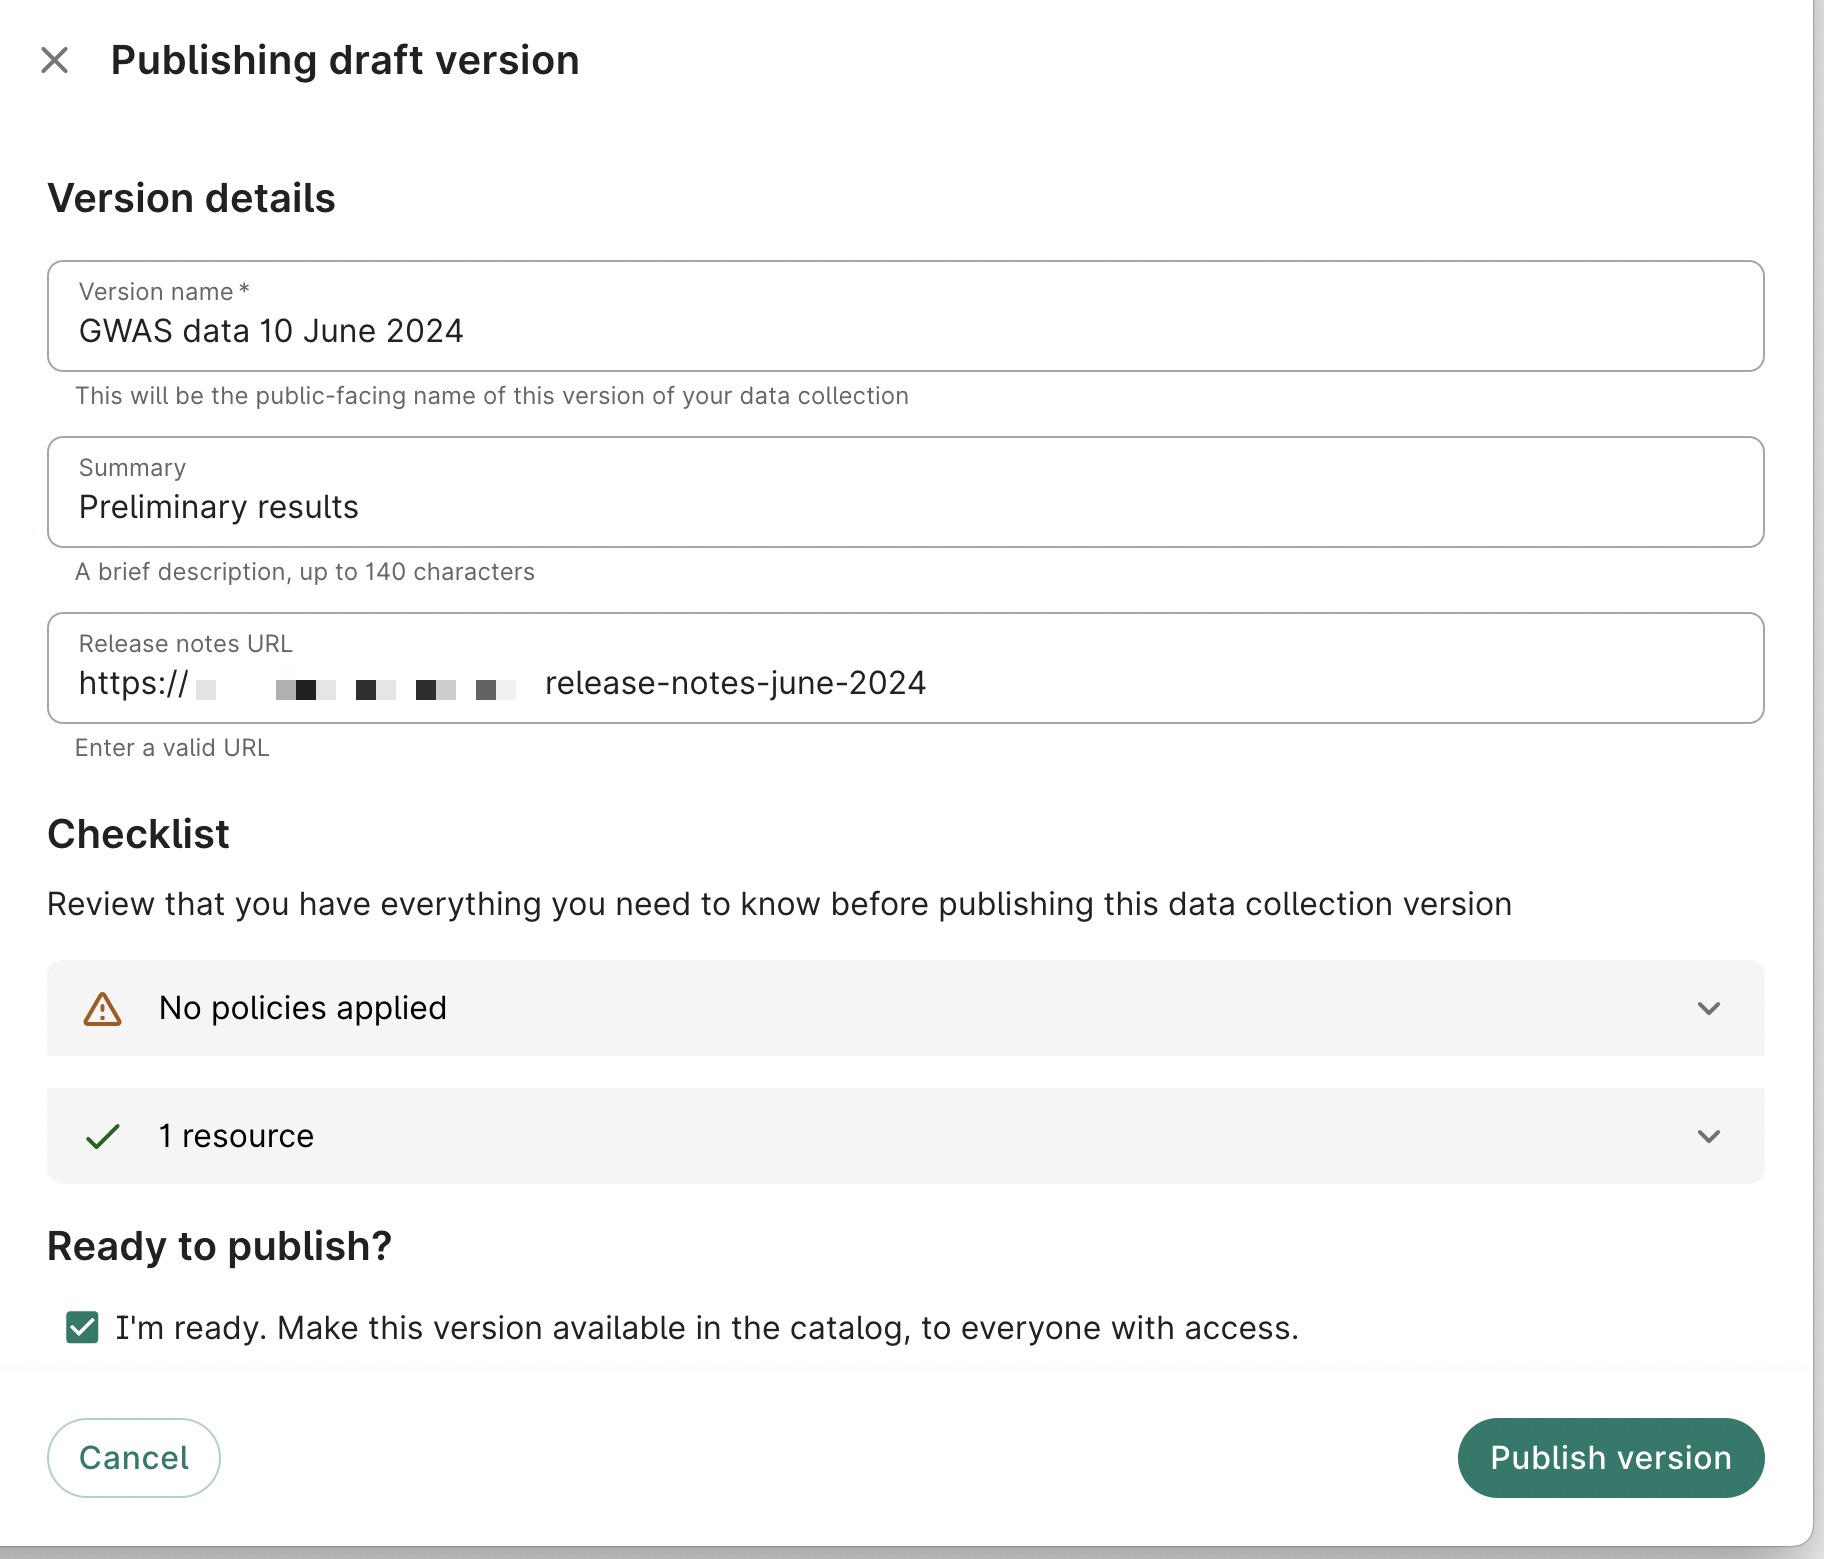 Screenshot of Publishing draft version dialog showing versions details and checklist to review prior to publishing a version.